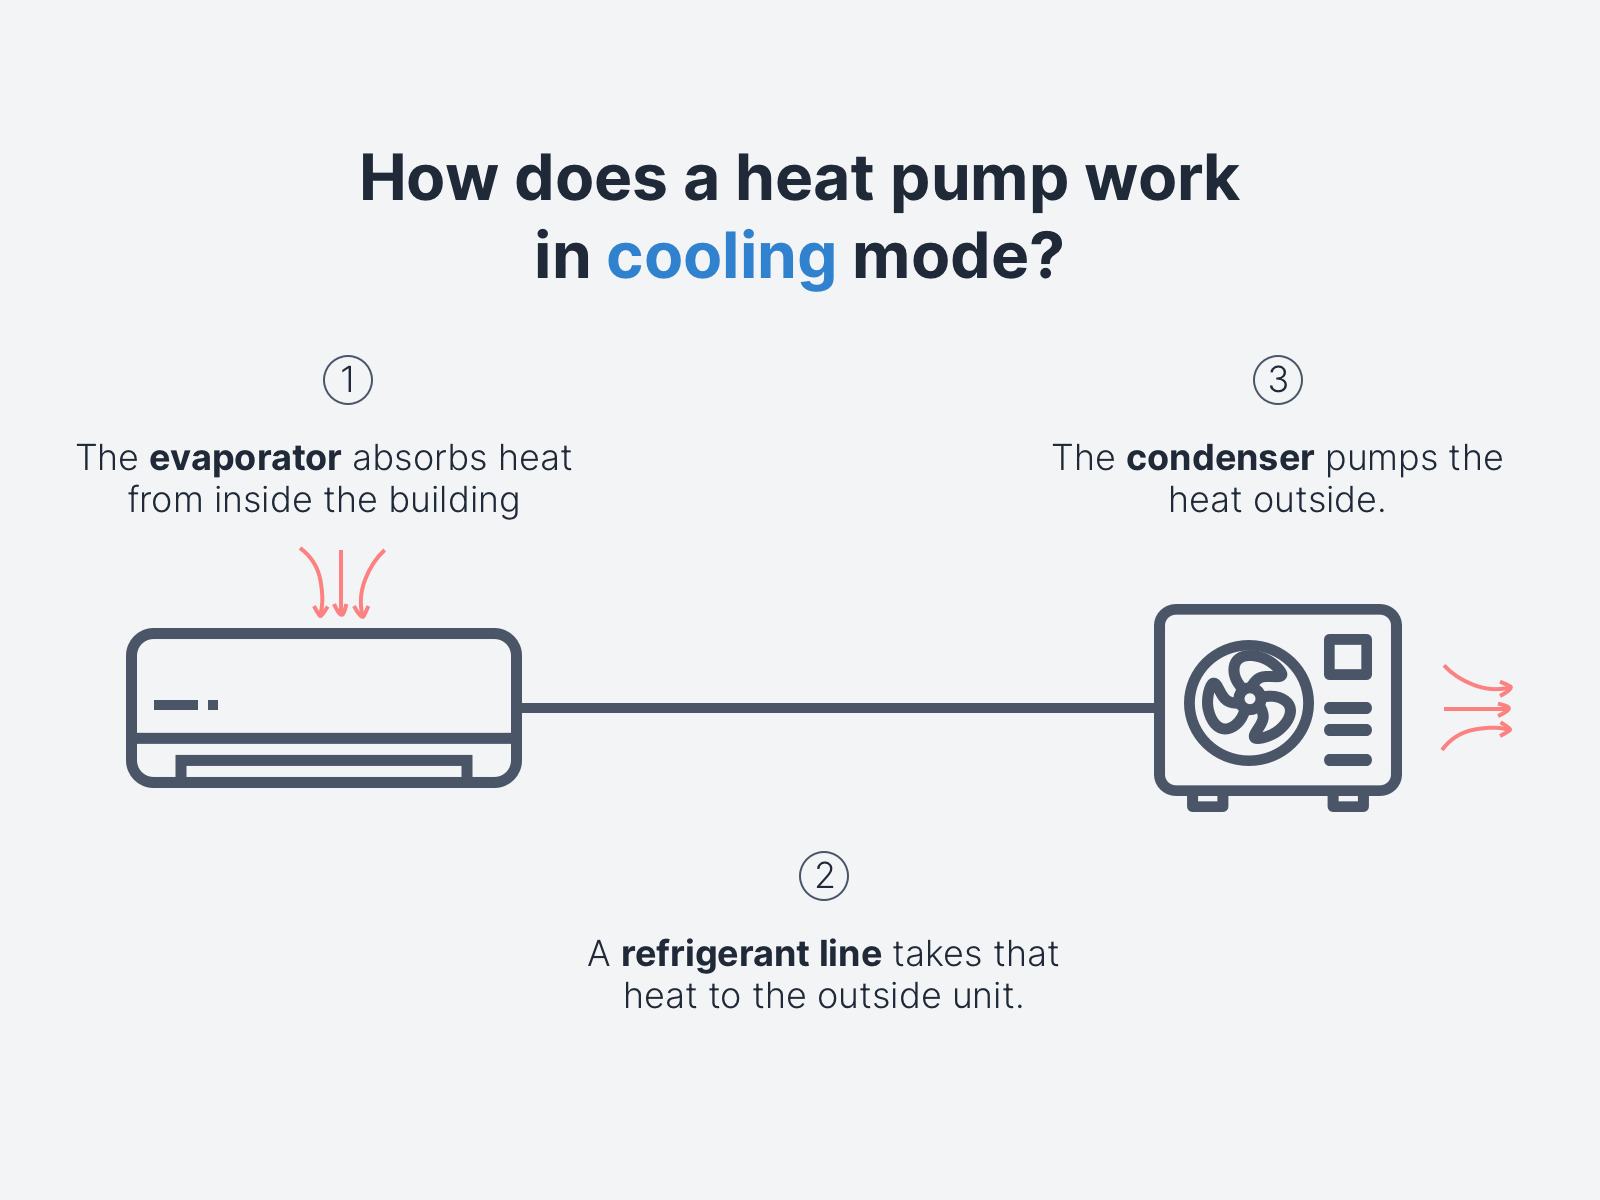 What Is The Benefit Of Having Separate Thermostats In A Mini-Split System?